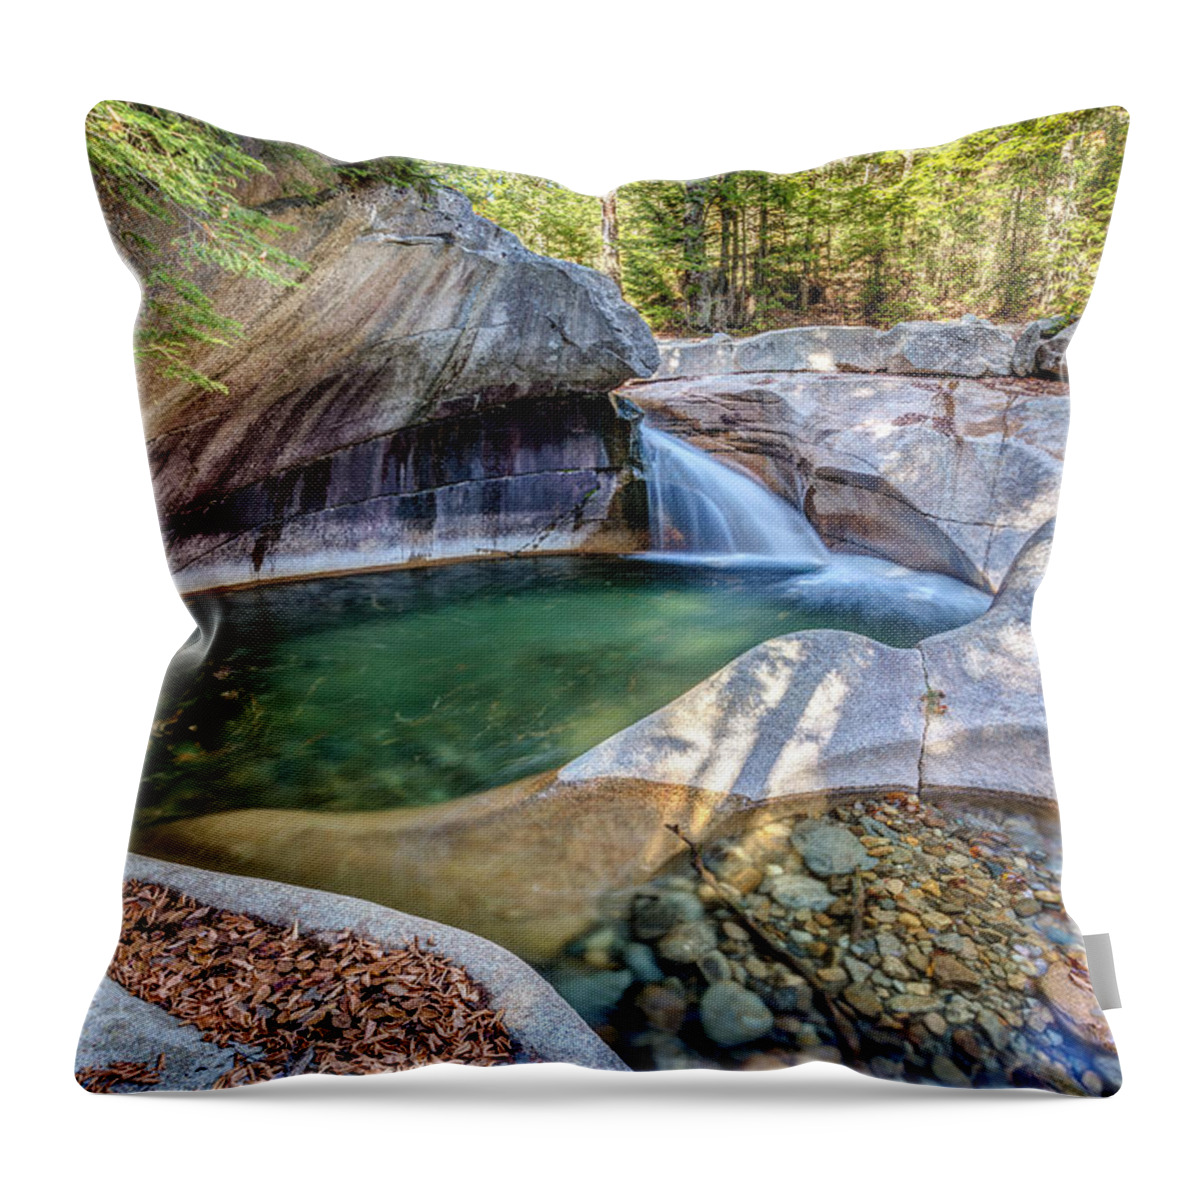 Franconia Notch Throw Pillow featuring the photograph The Basin Franconia Notch by Pierre Leclerc Photography